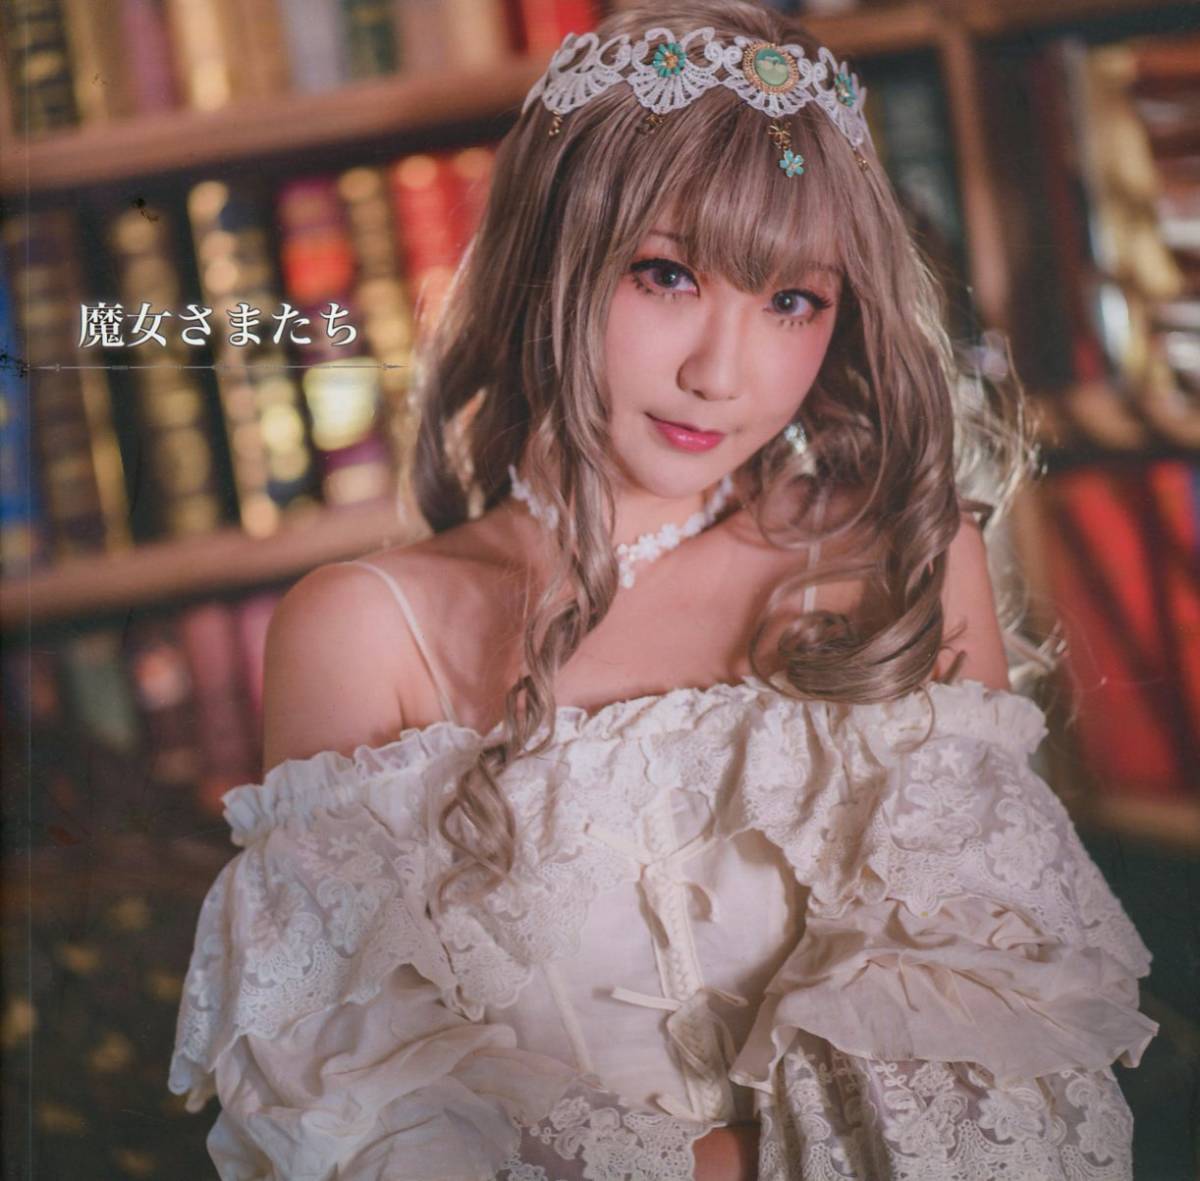 HIKO (HIKO / Witches Signed / Cosplay Photo Book (Original Costume) / 50 Pages Published in 2018 Taiwanese Cosplayer, By Title, Other Works, others